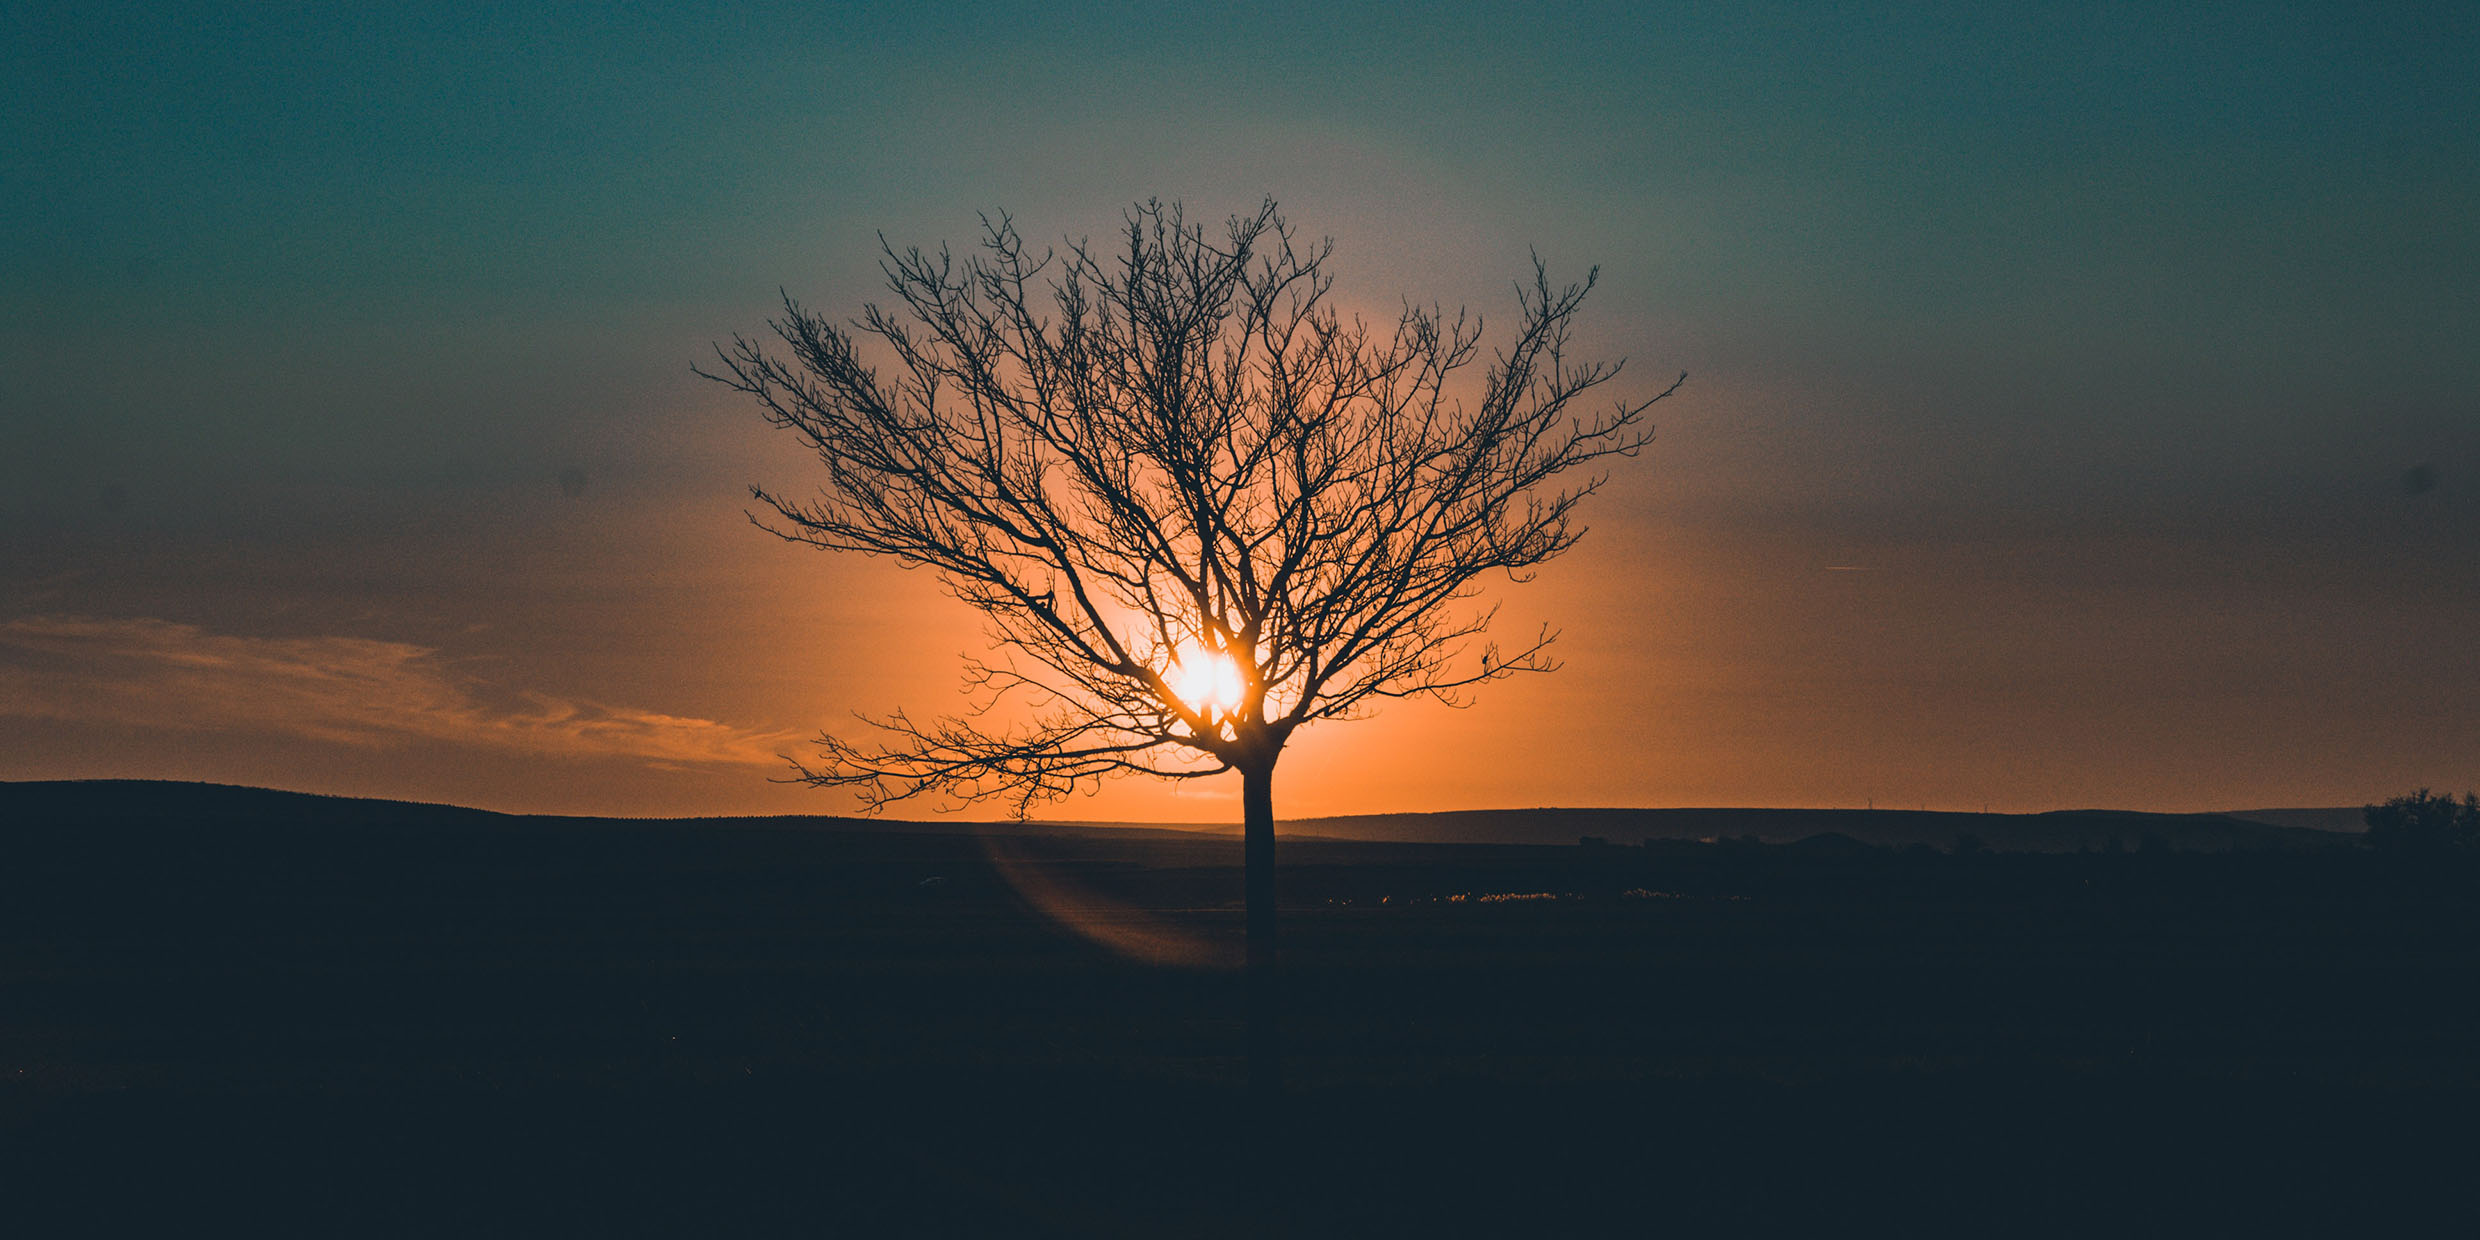 Image of a tree silhouetted by the rising sun